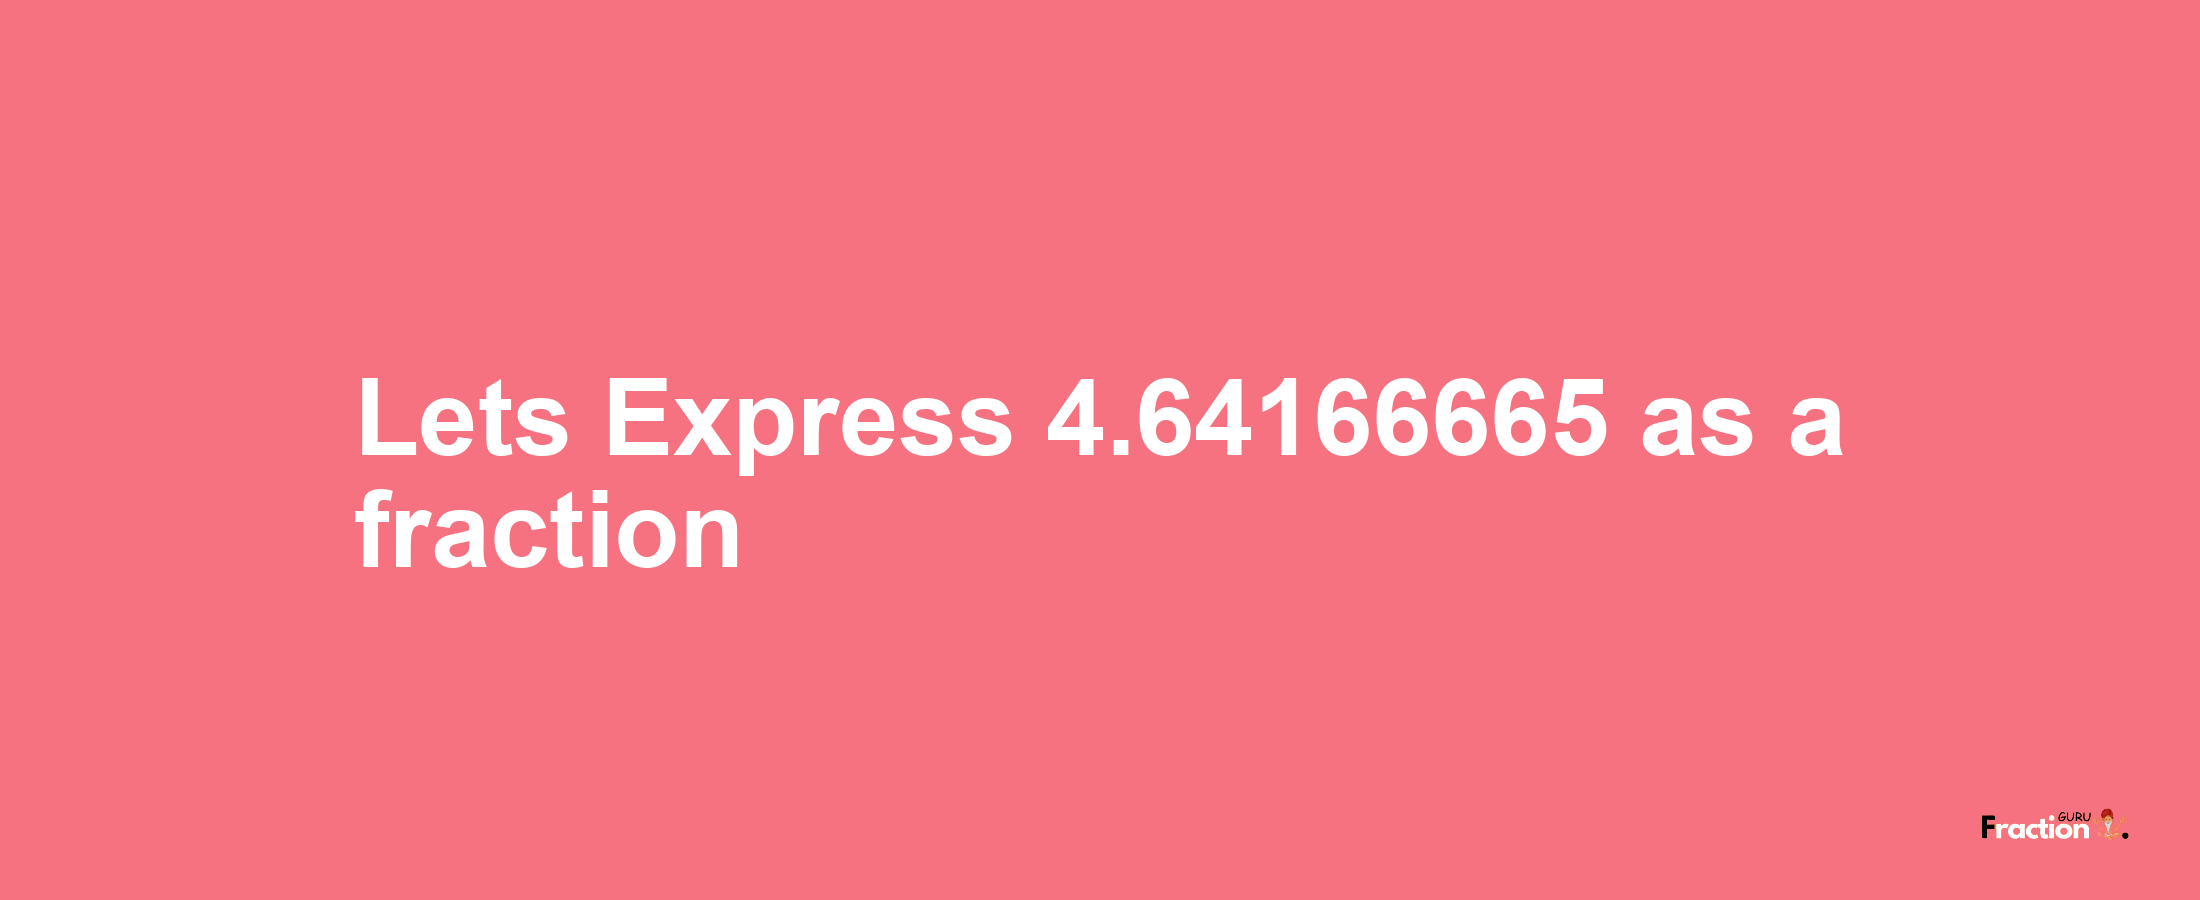 Lets Express 4.64166665 as afraction